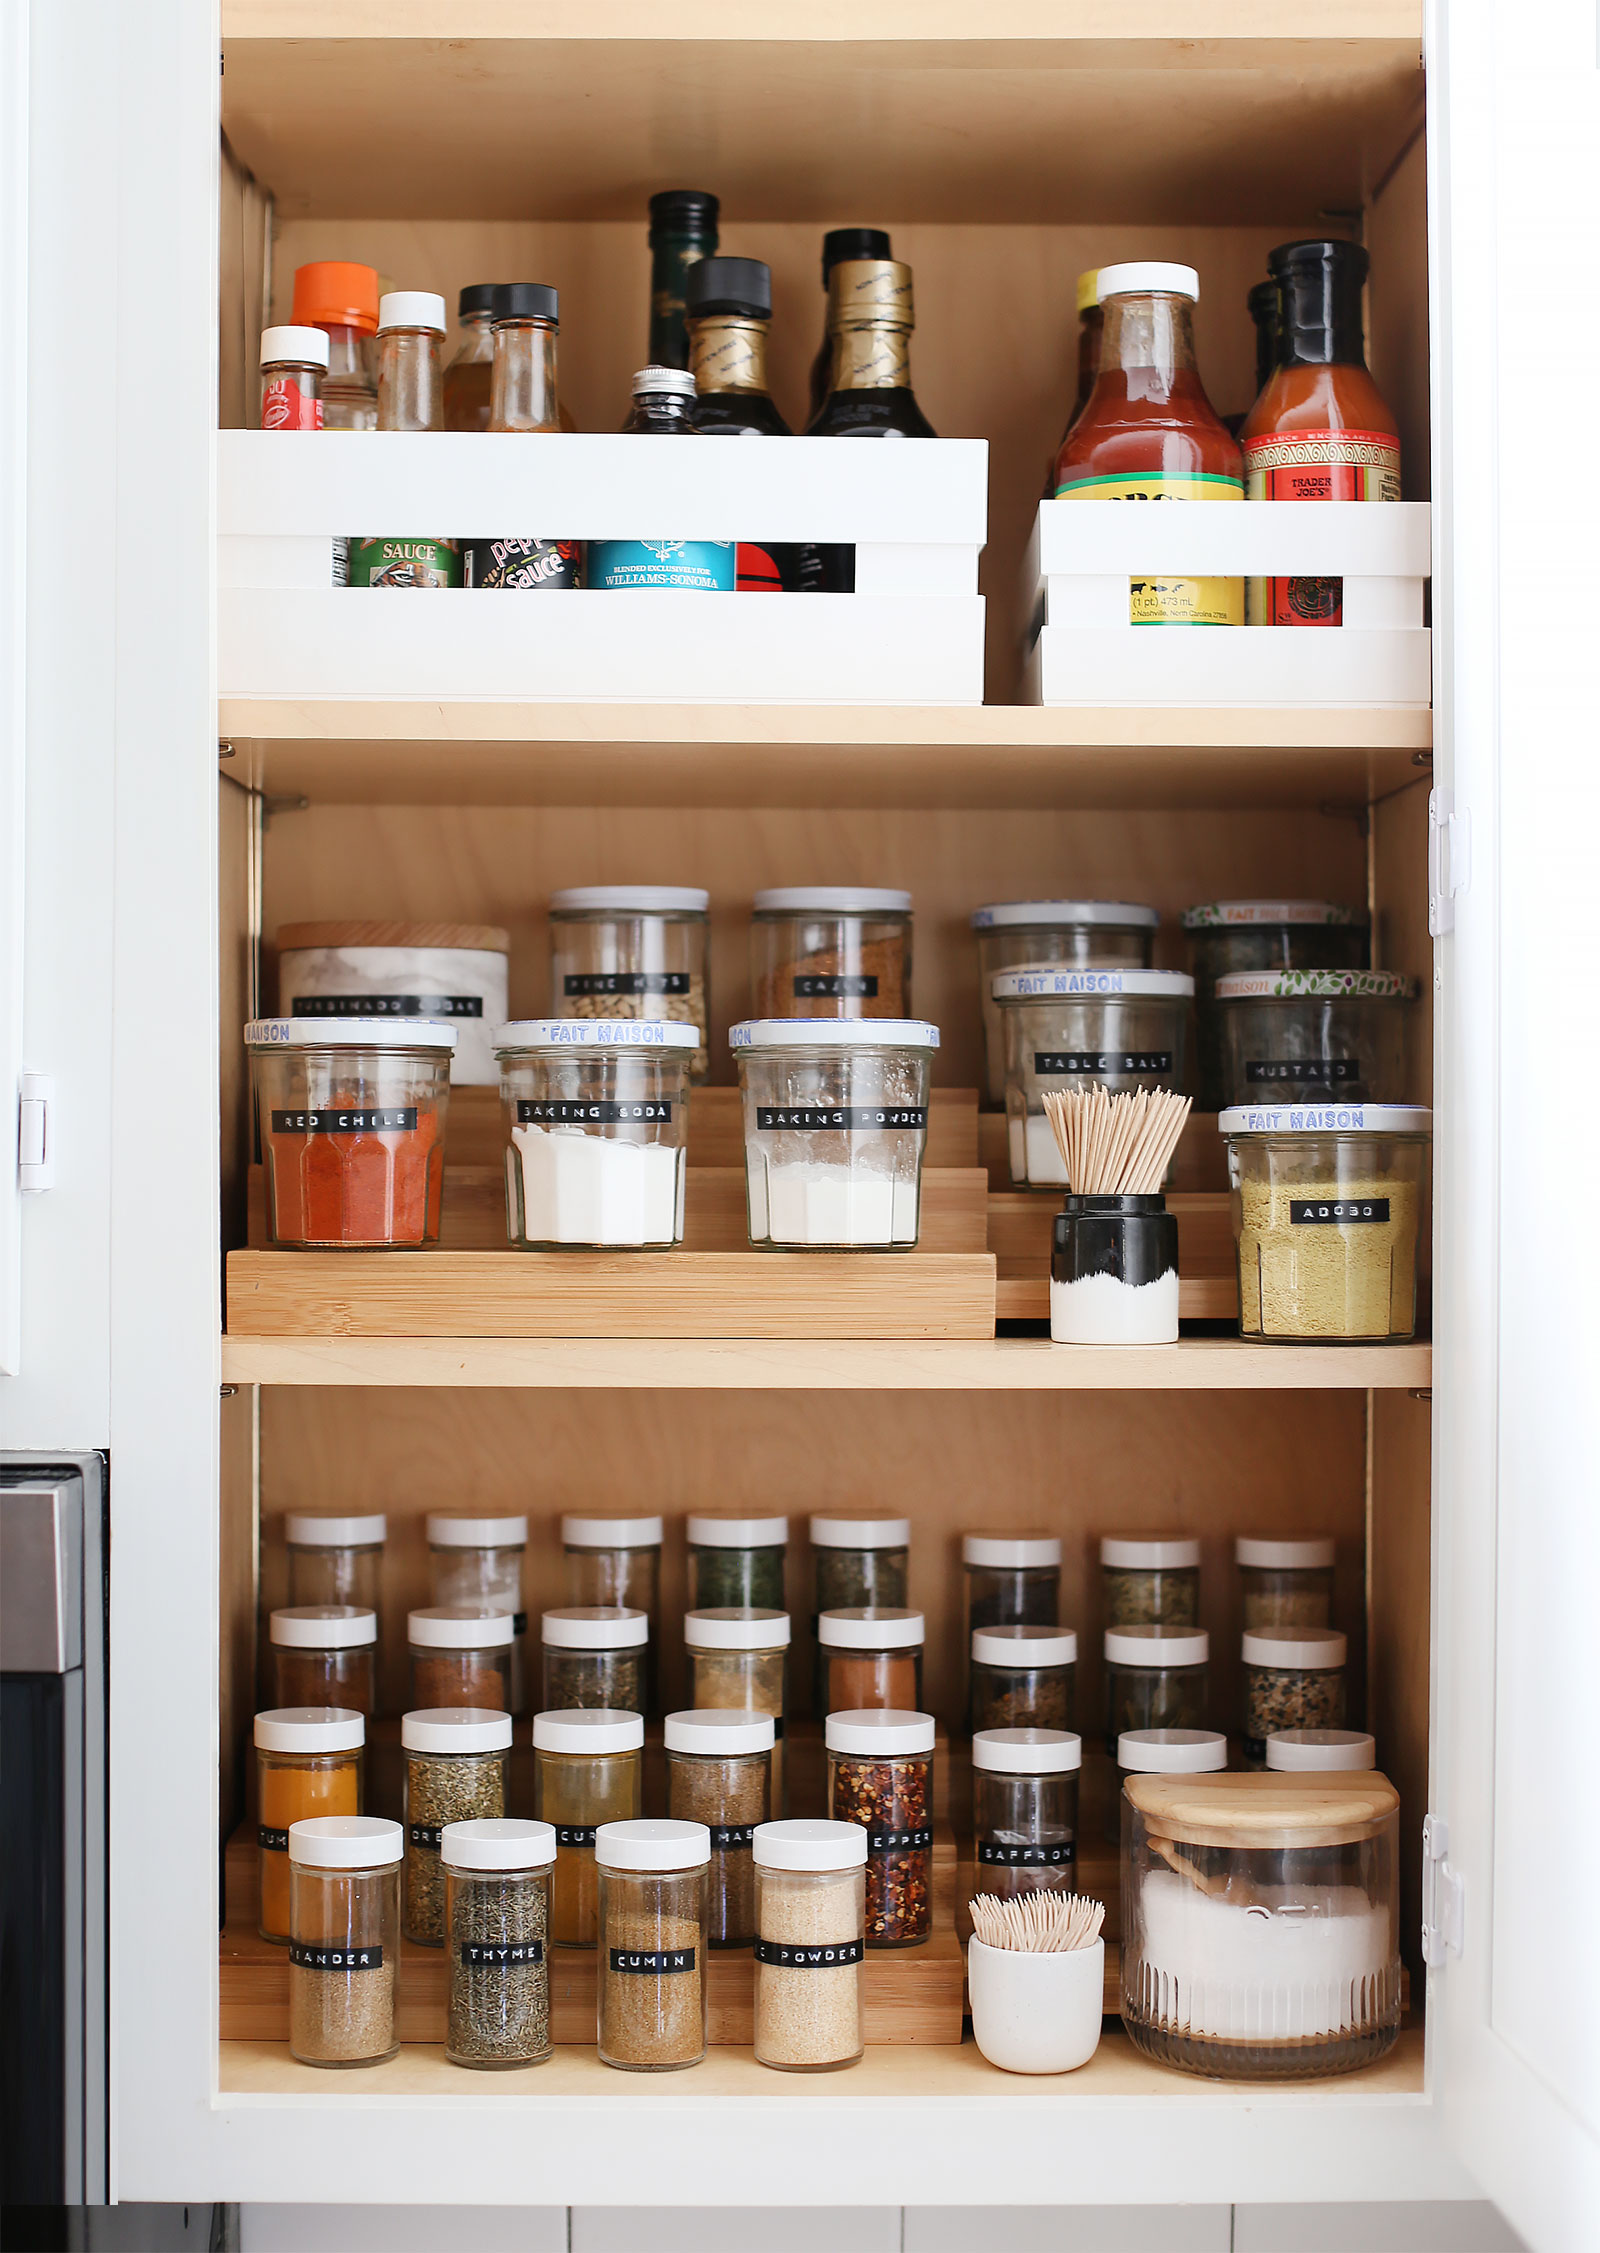 5 Spice Rack Ideas for Your Most Organized Kitchen Yet